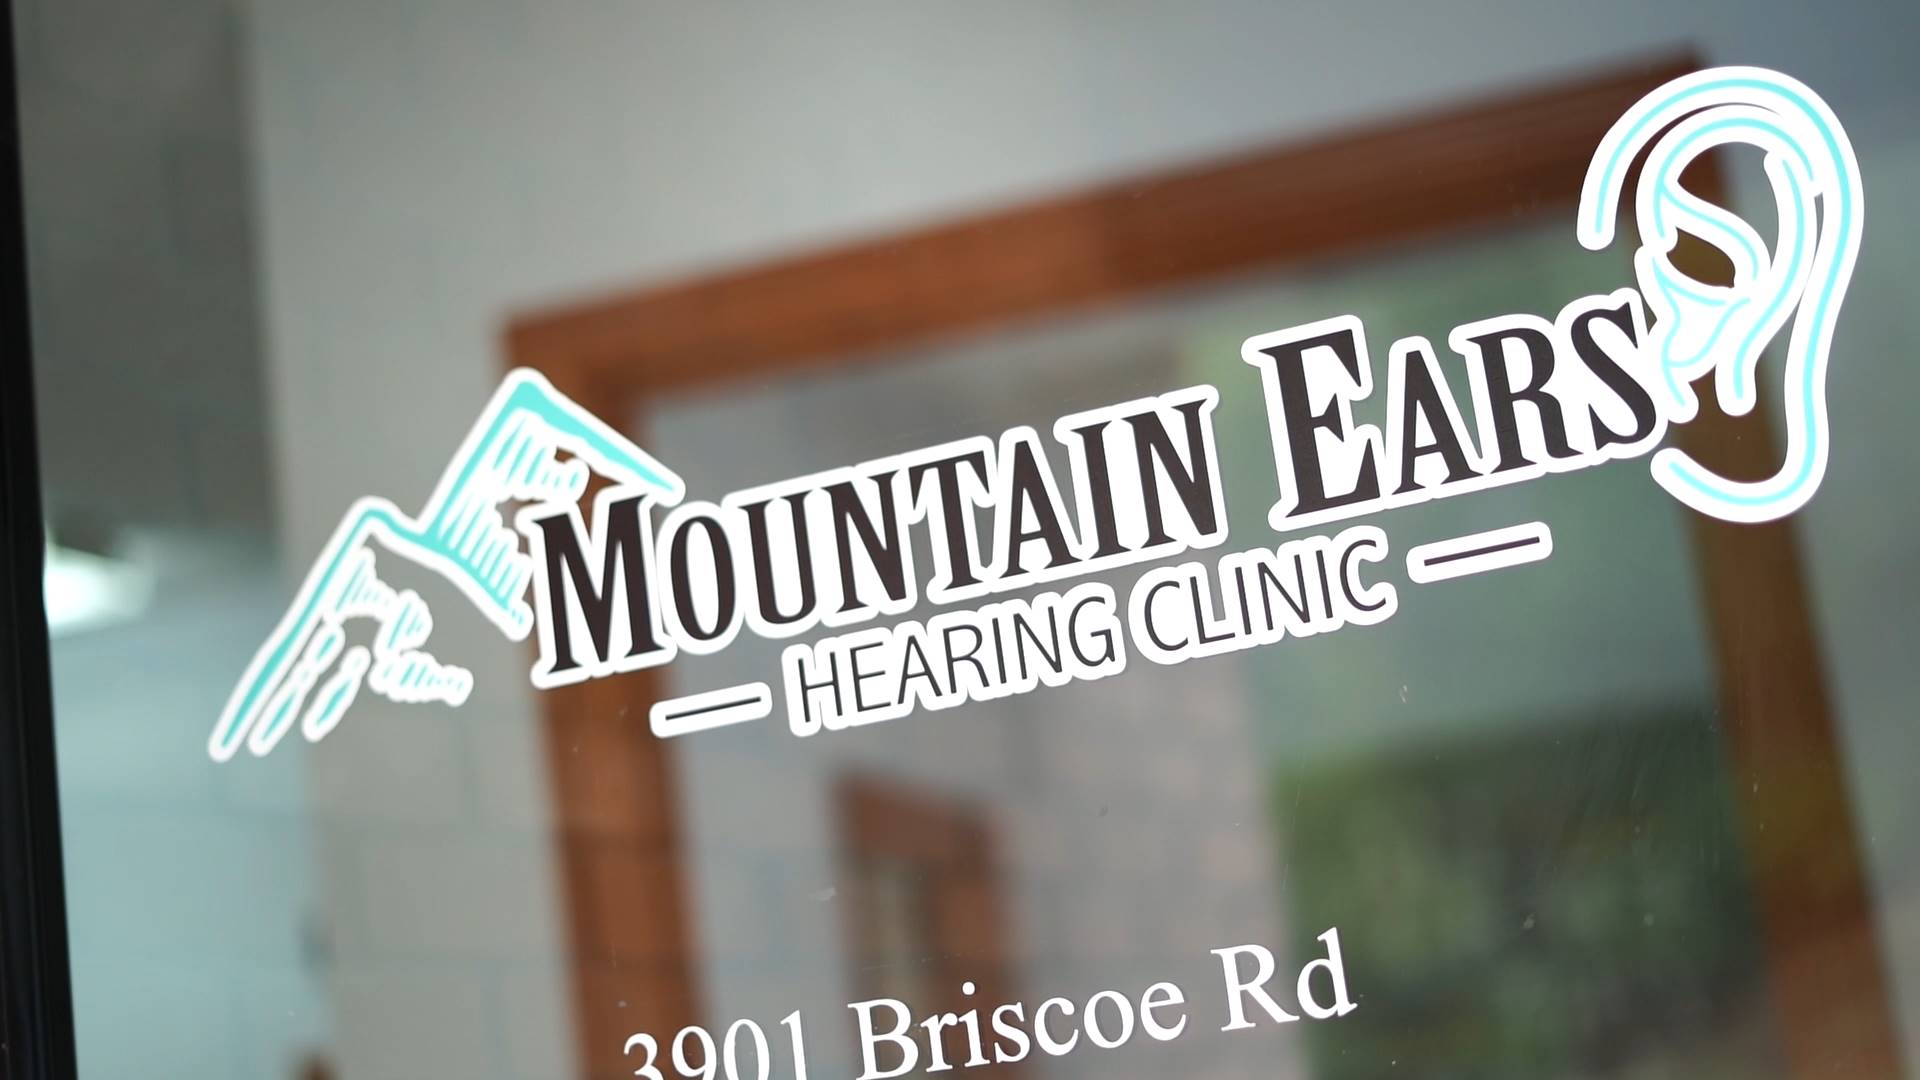 Erin Wells hears the call of home, returns to open audiology clinic